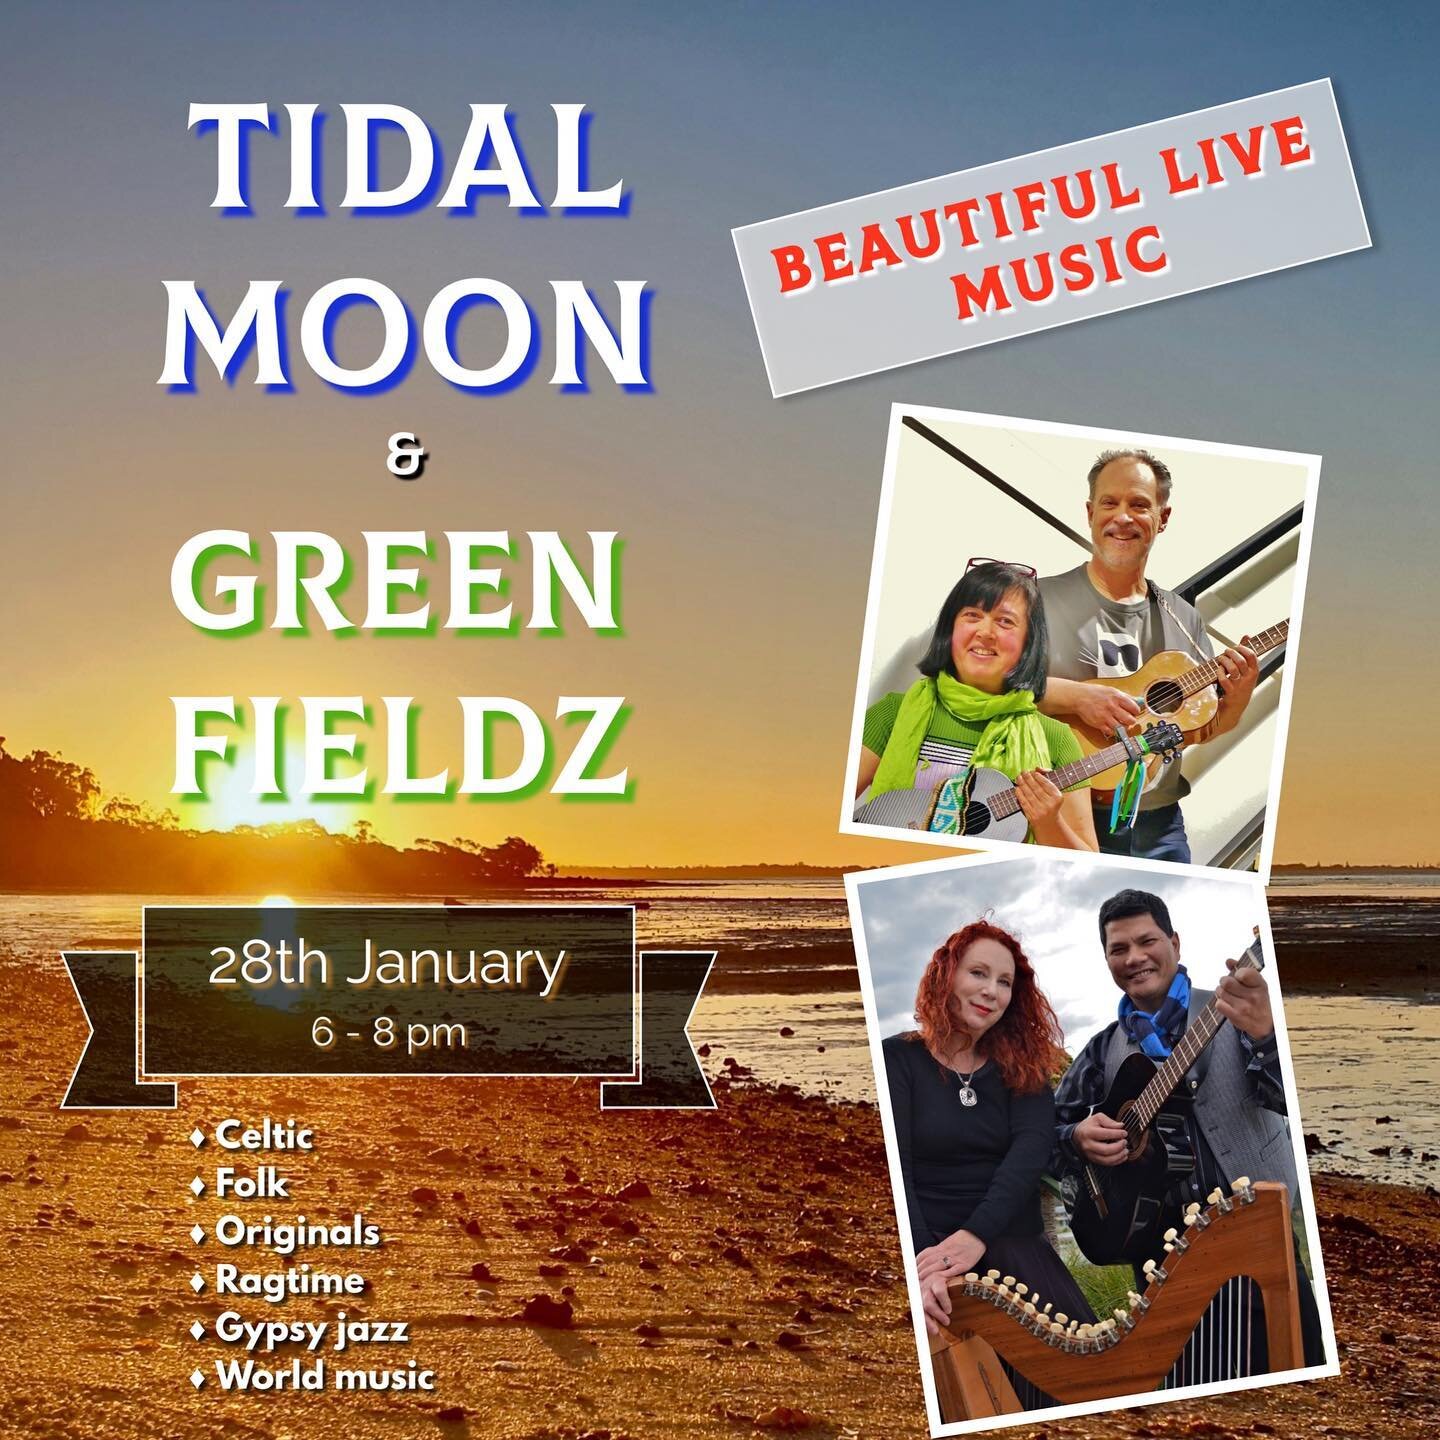 Come and join us! Beautiful live music event on Coochiemudlo Island, 26 January 2023, 6-8 pm. Superb music by Tidal Moon and Green Fieldz at outdoor ampitheatre, close to ferry terminal. Tickets available at the door or online. trybooking.com/CESTU